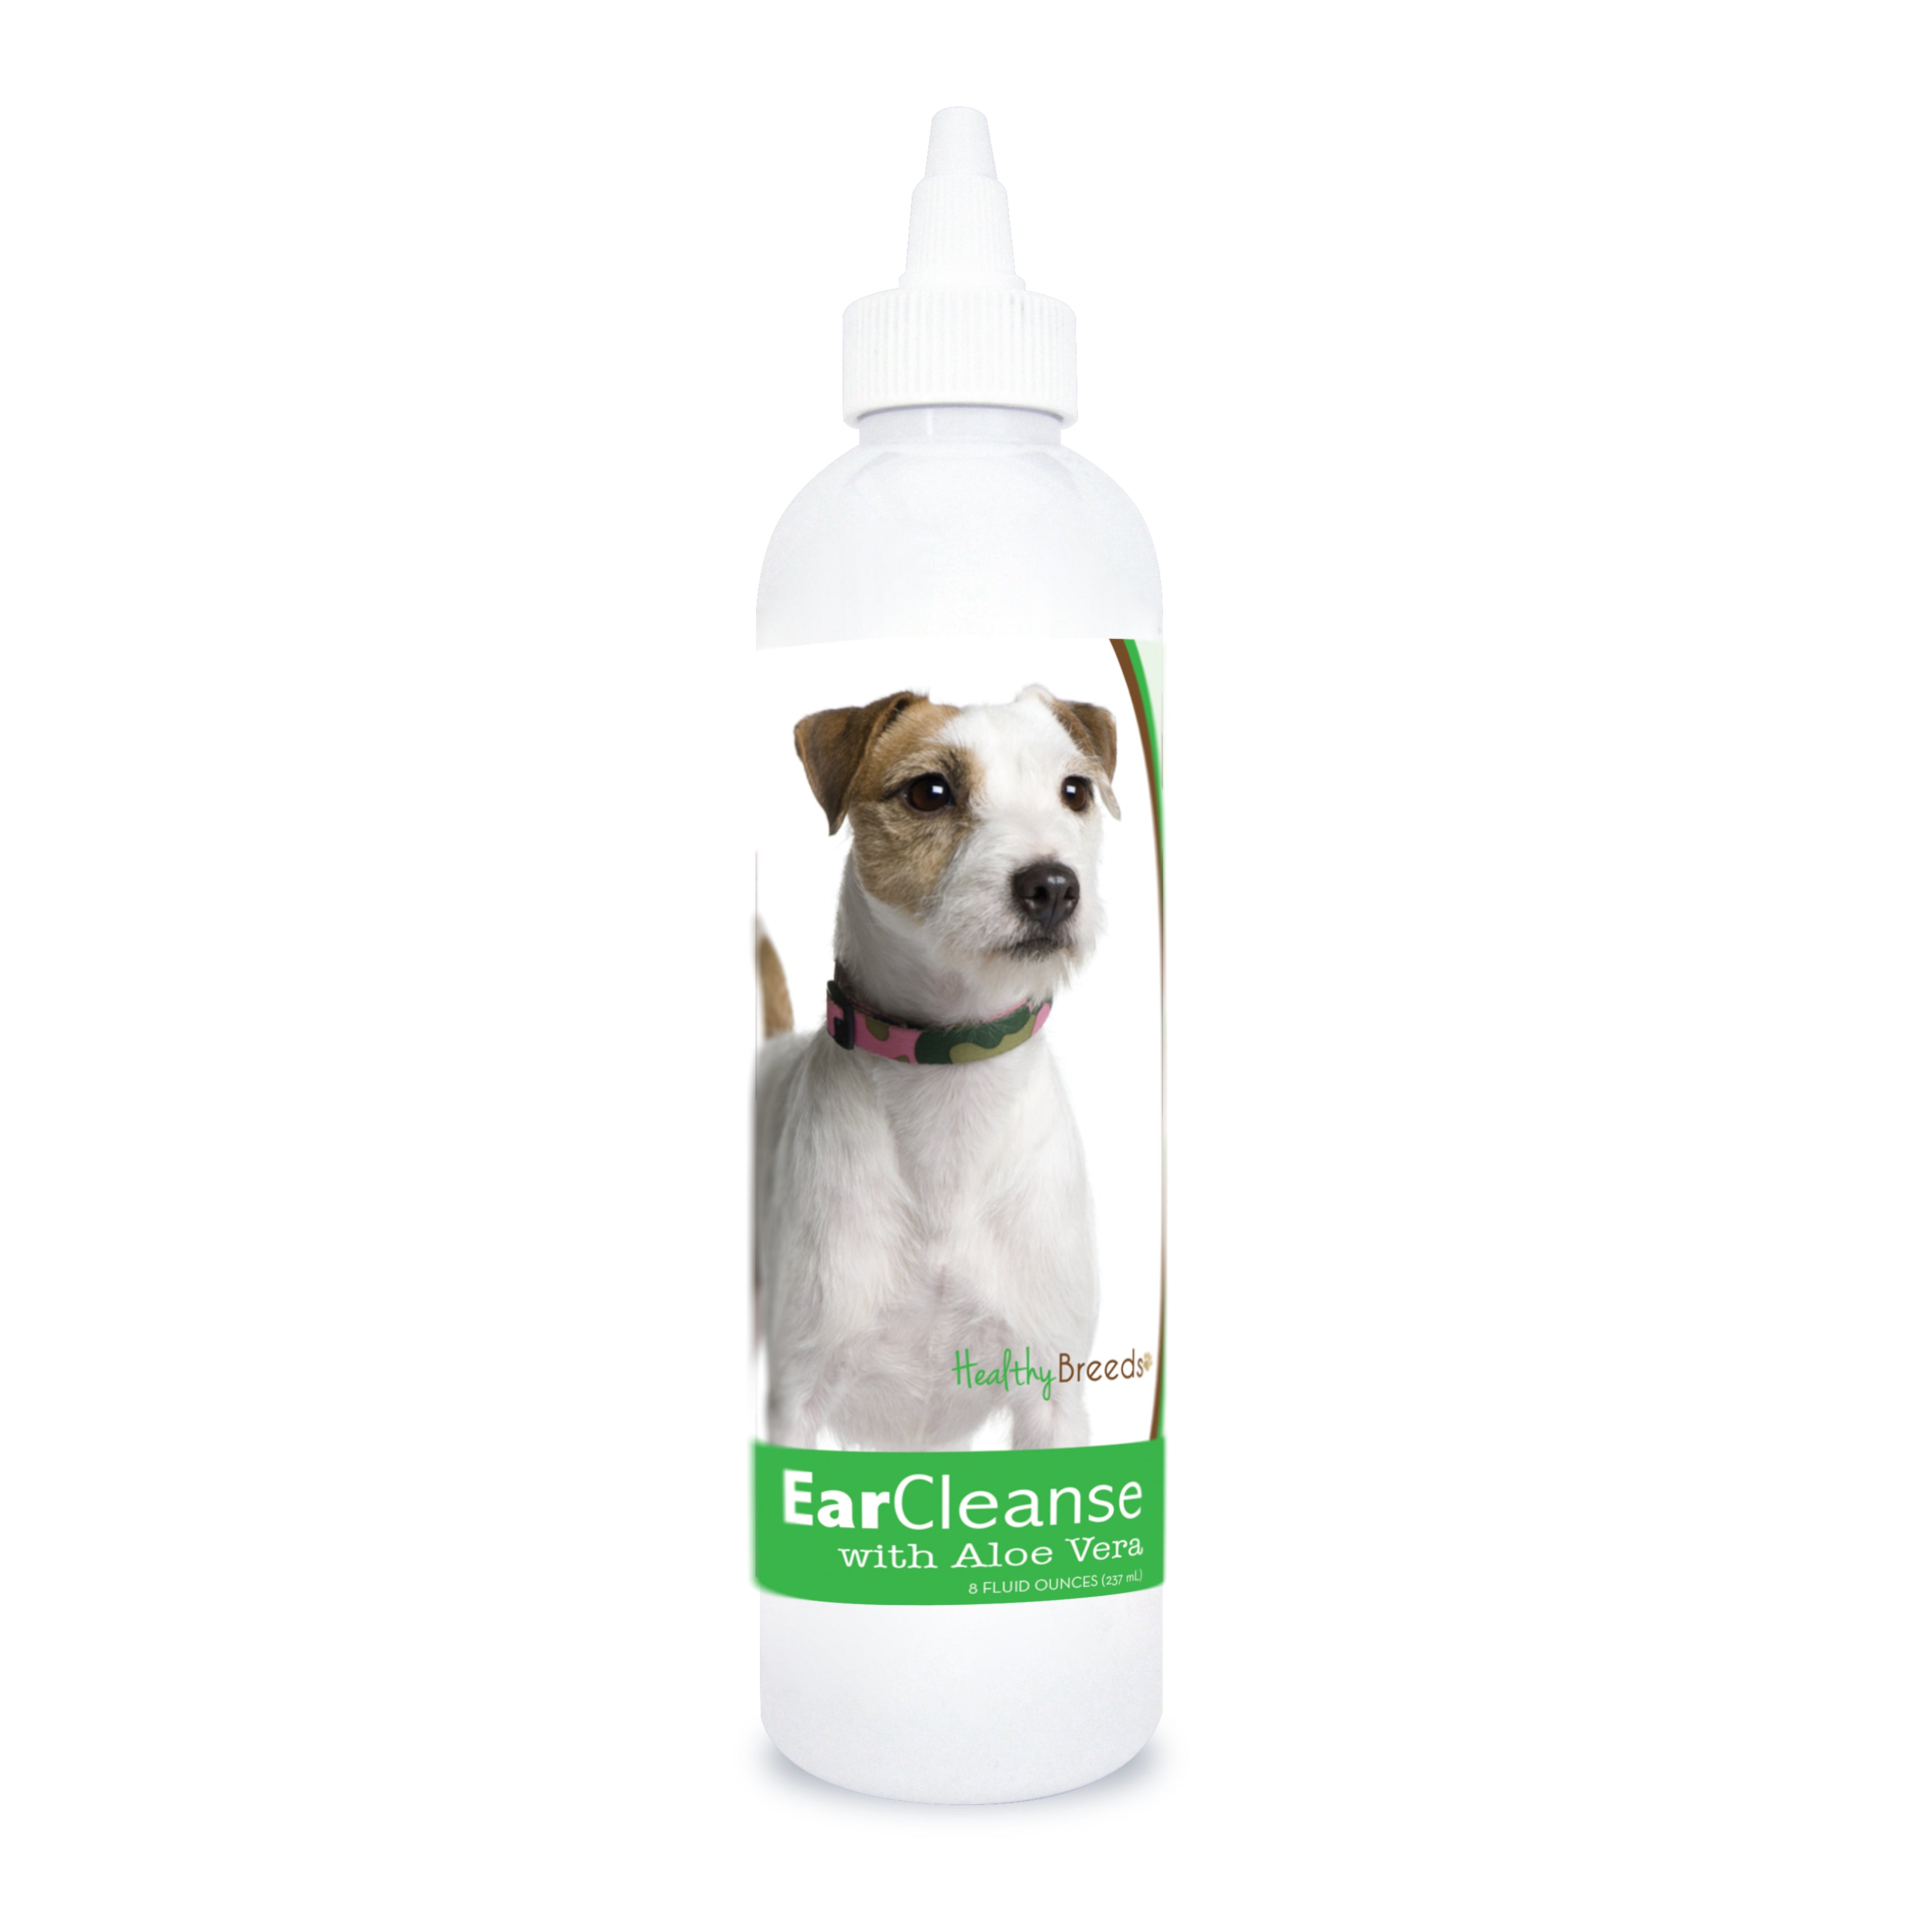 Parson Russell Terrier Ear Cleanse with Aloe Vera Cucumber Melon 8 oz